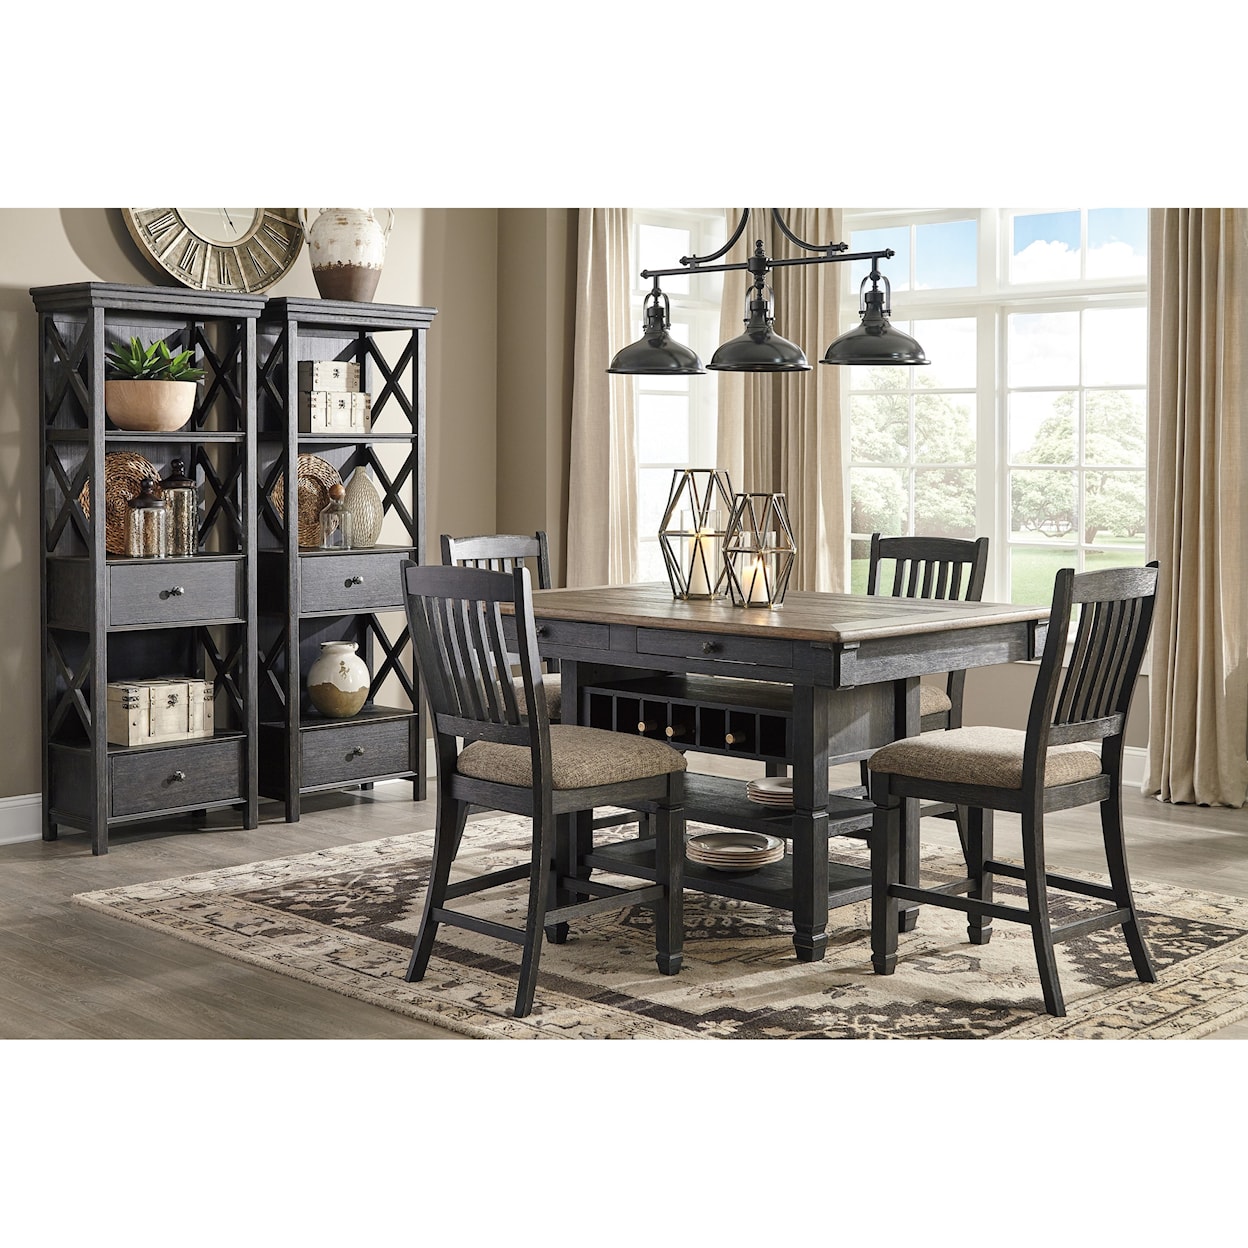 Signature Design by Ashley Furniture Tyler Creek Casual Dining Room Group